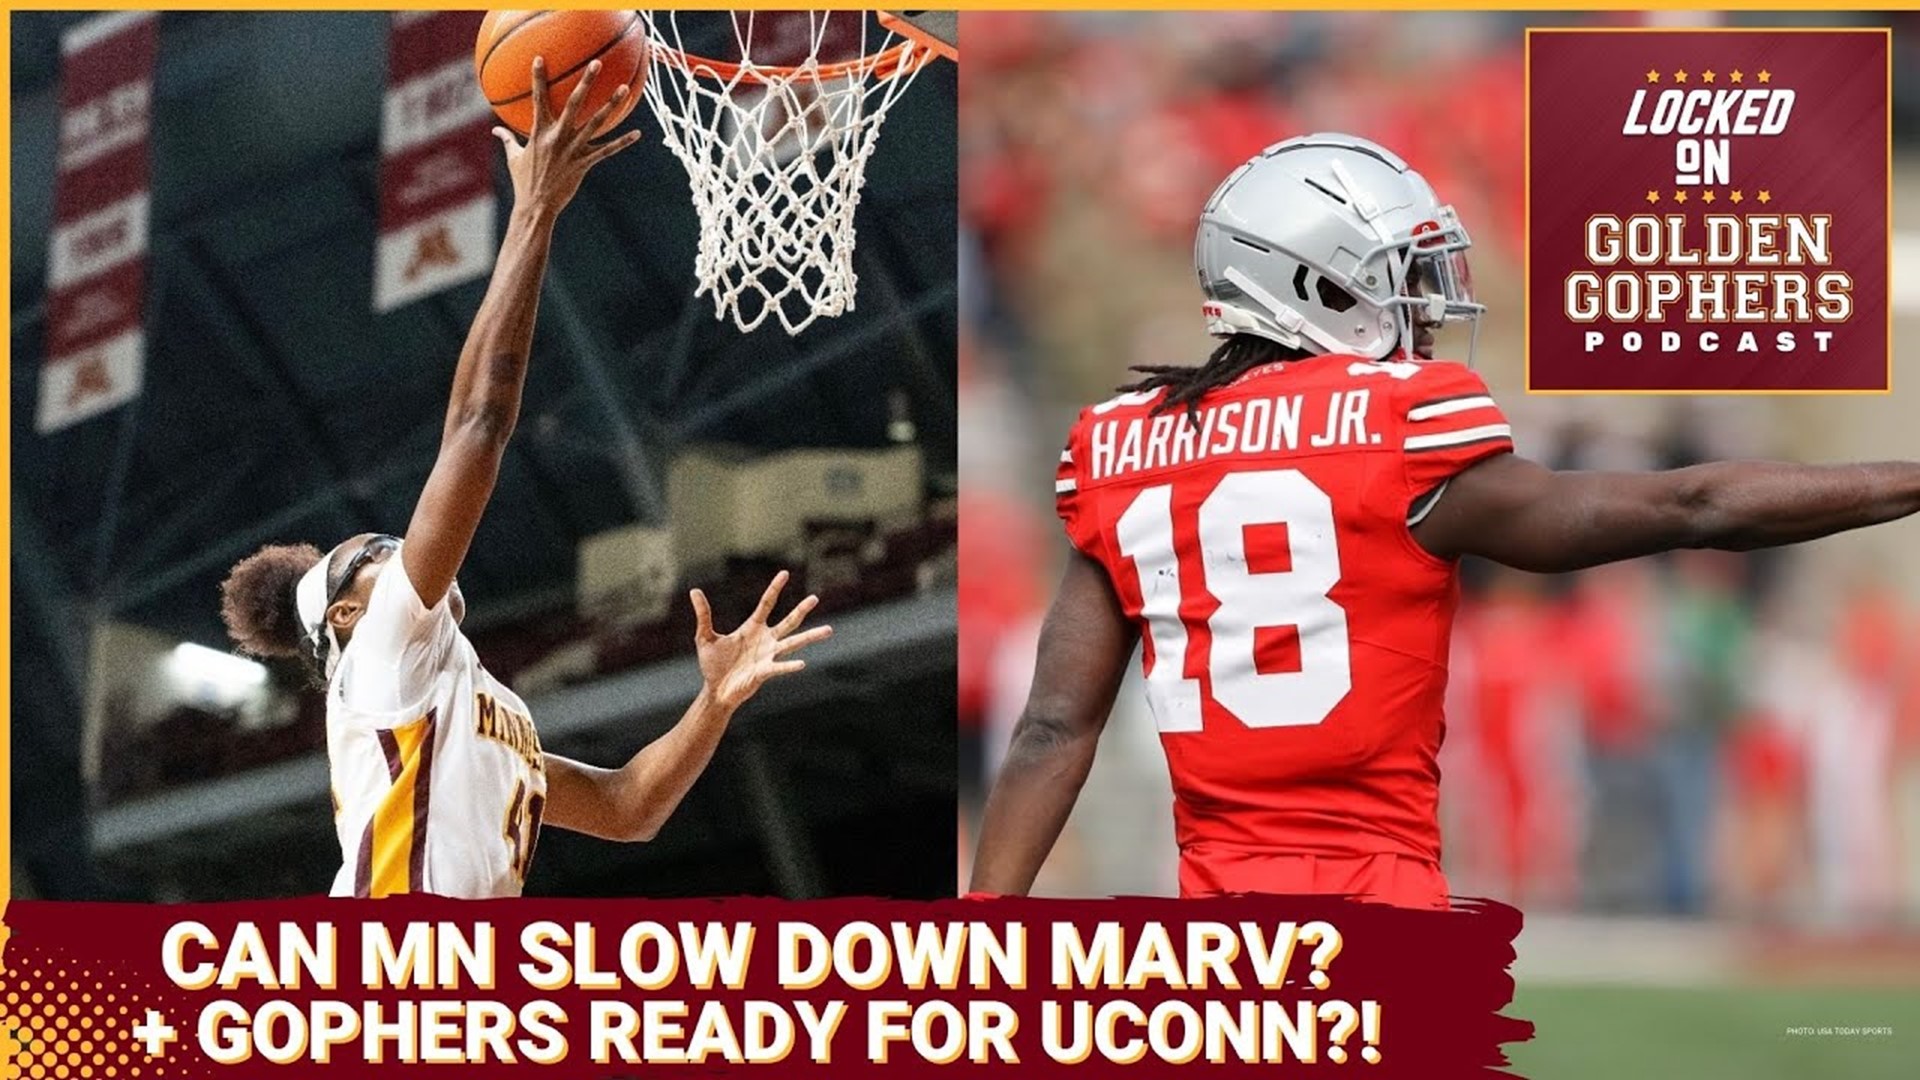 On today's episode of the Locked On Golden Gophers podcast, we discuss the key player for Ohio State in Marvin Harrison Jr. Can Minnesota slow him down at all?